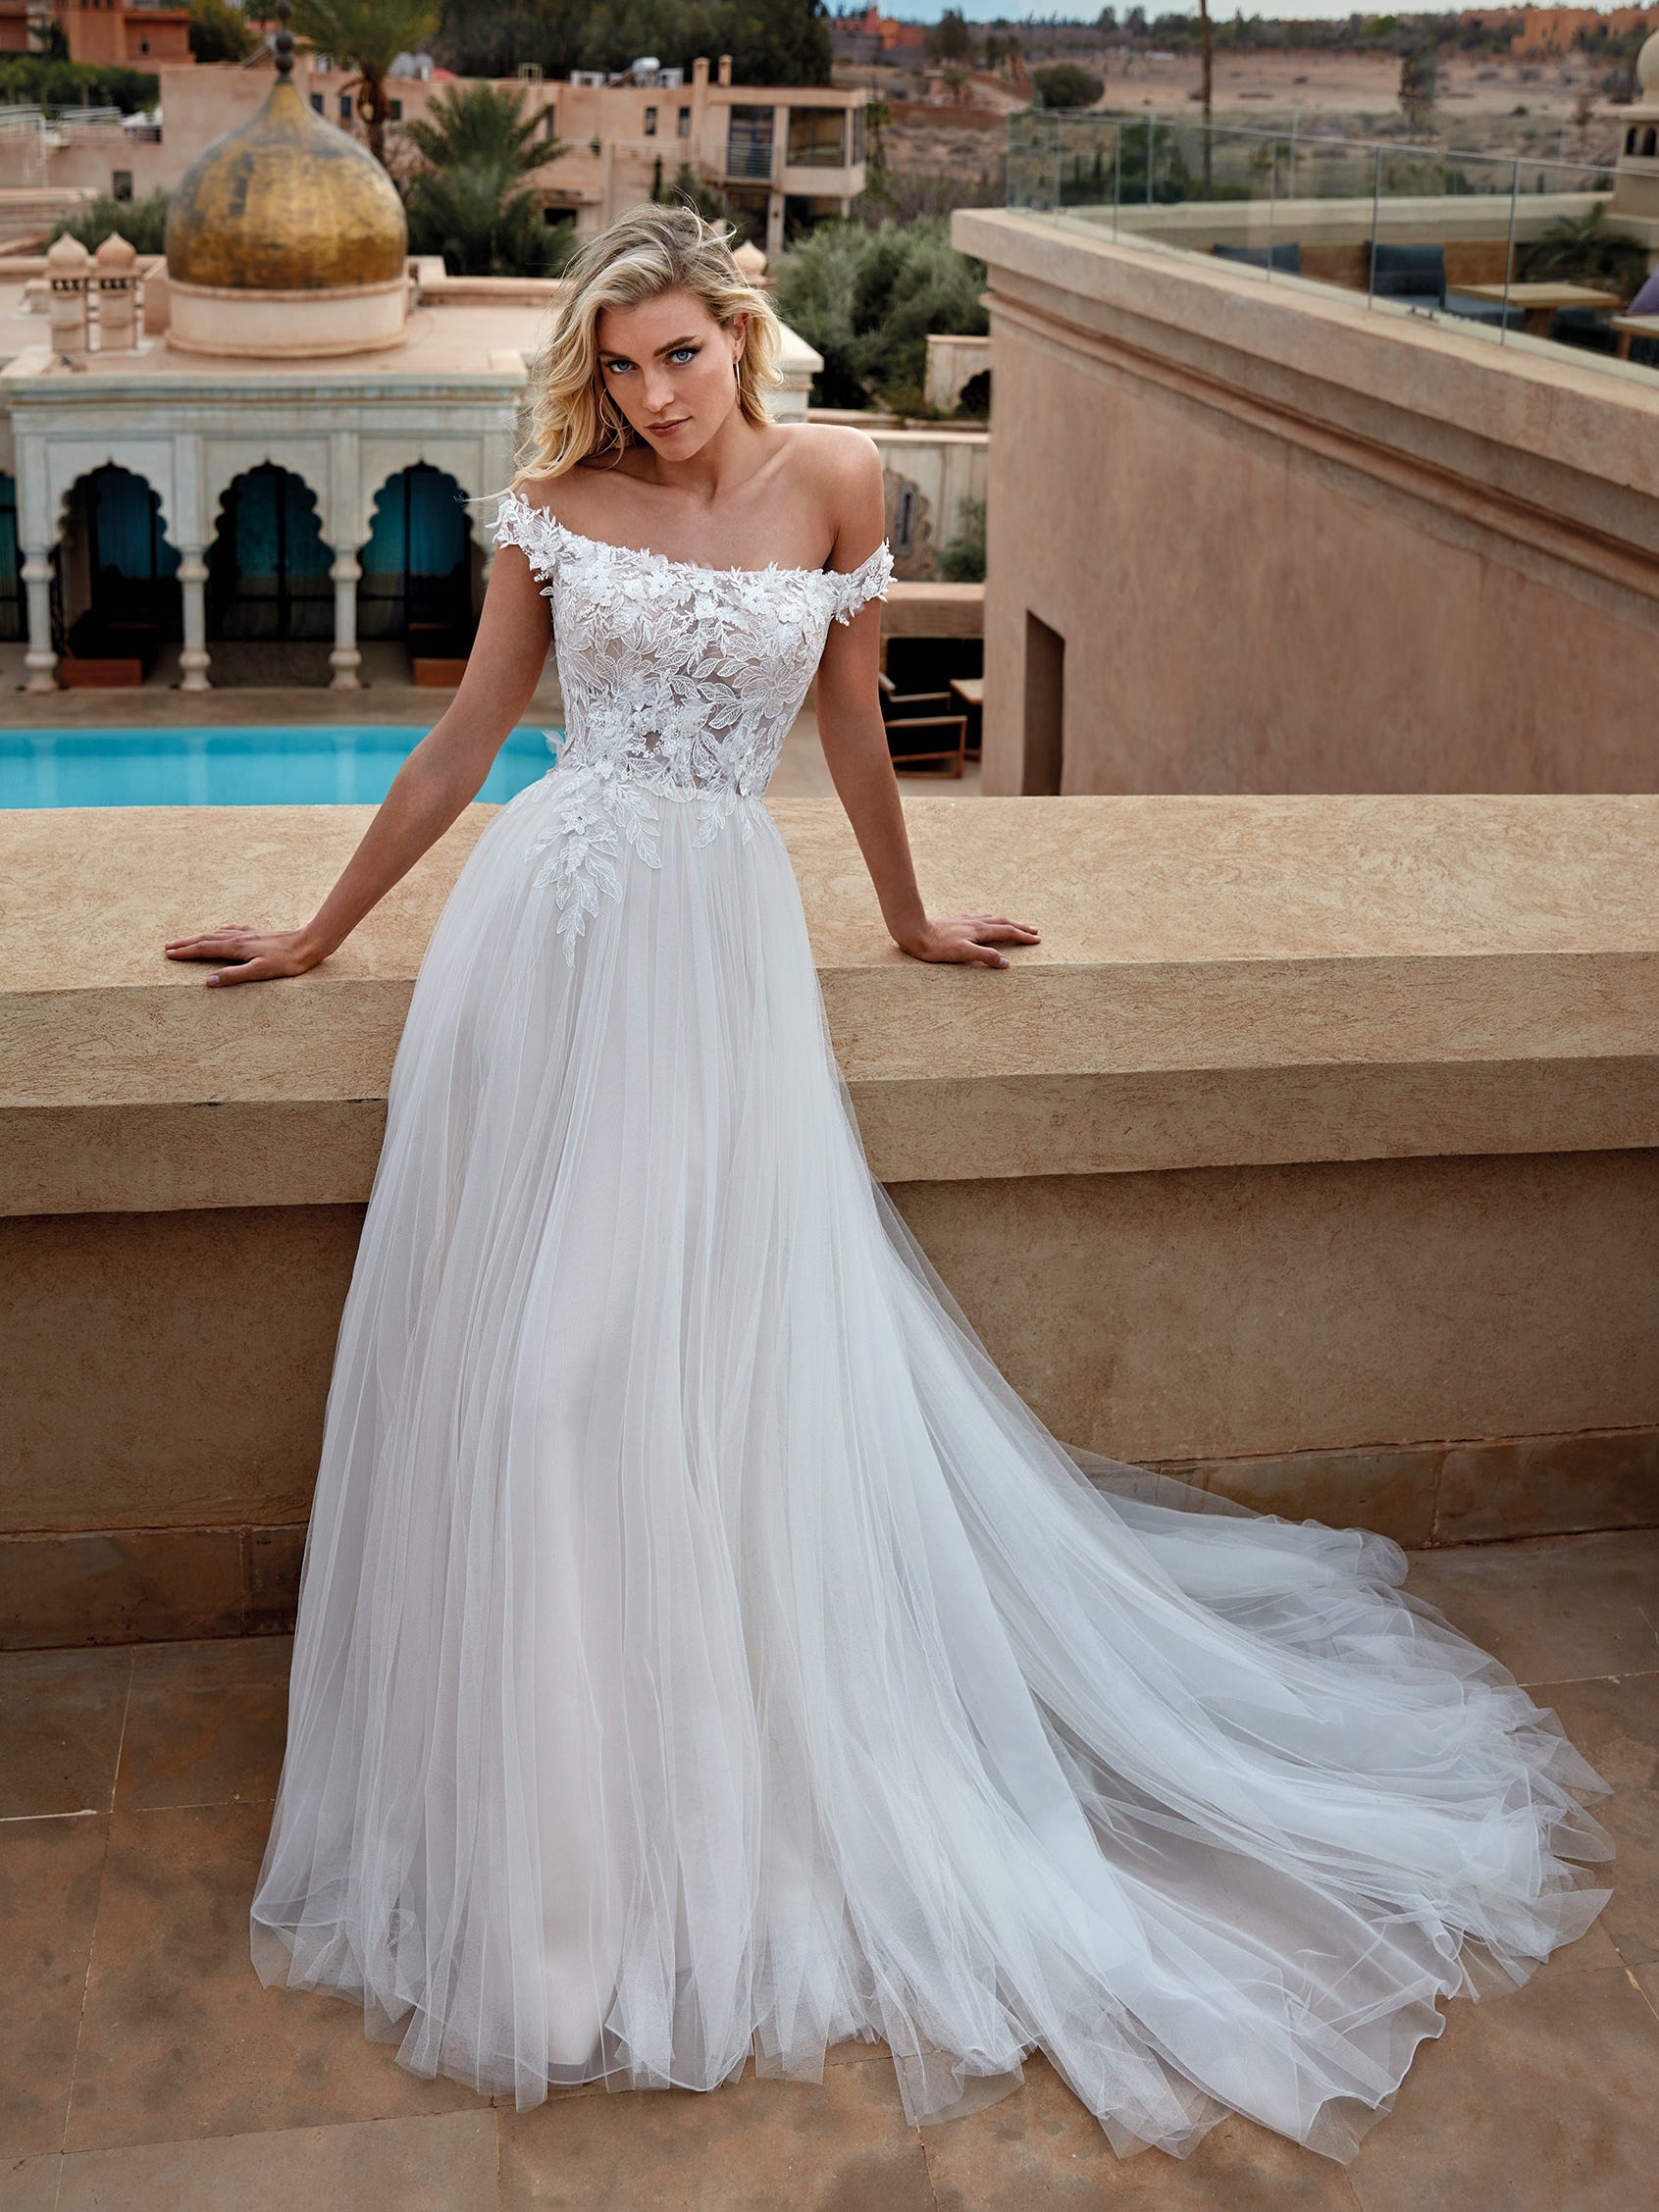 Bohemian Beach Wedding Dress 2017 Sexy V Neck Backless Greek Style With  Sleeves Country Long Sleeve Wedding Gown From Nanna11, $115.55 | DHgate.Com